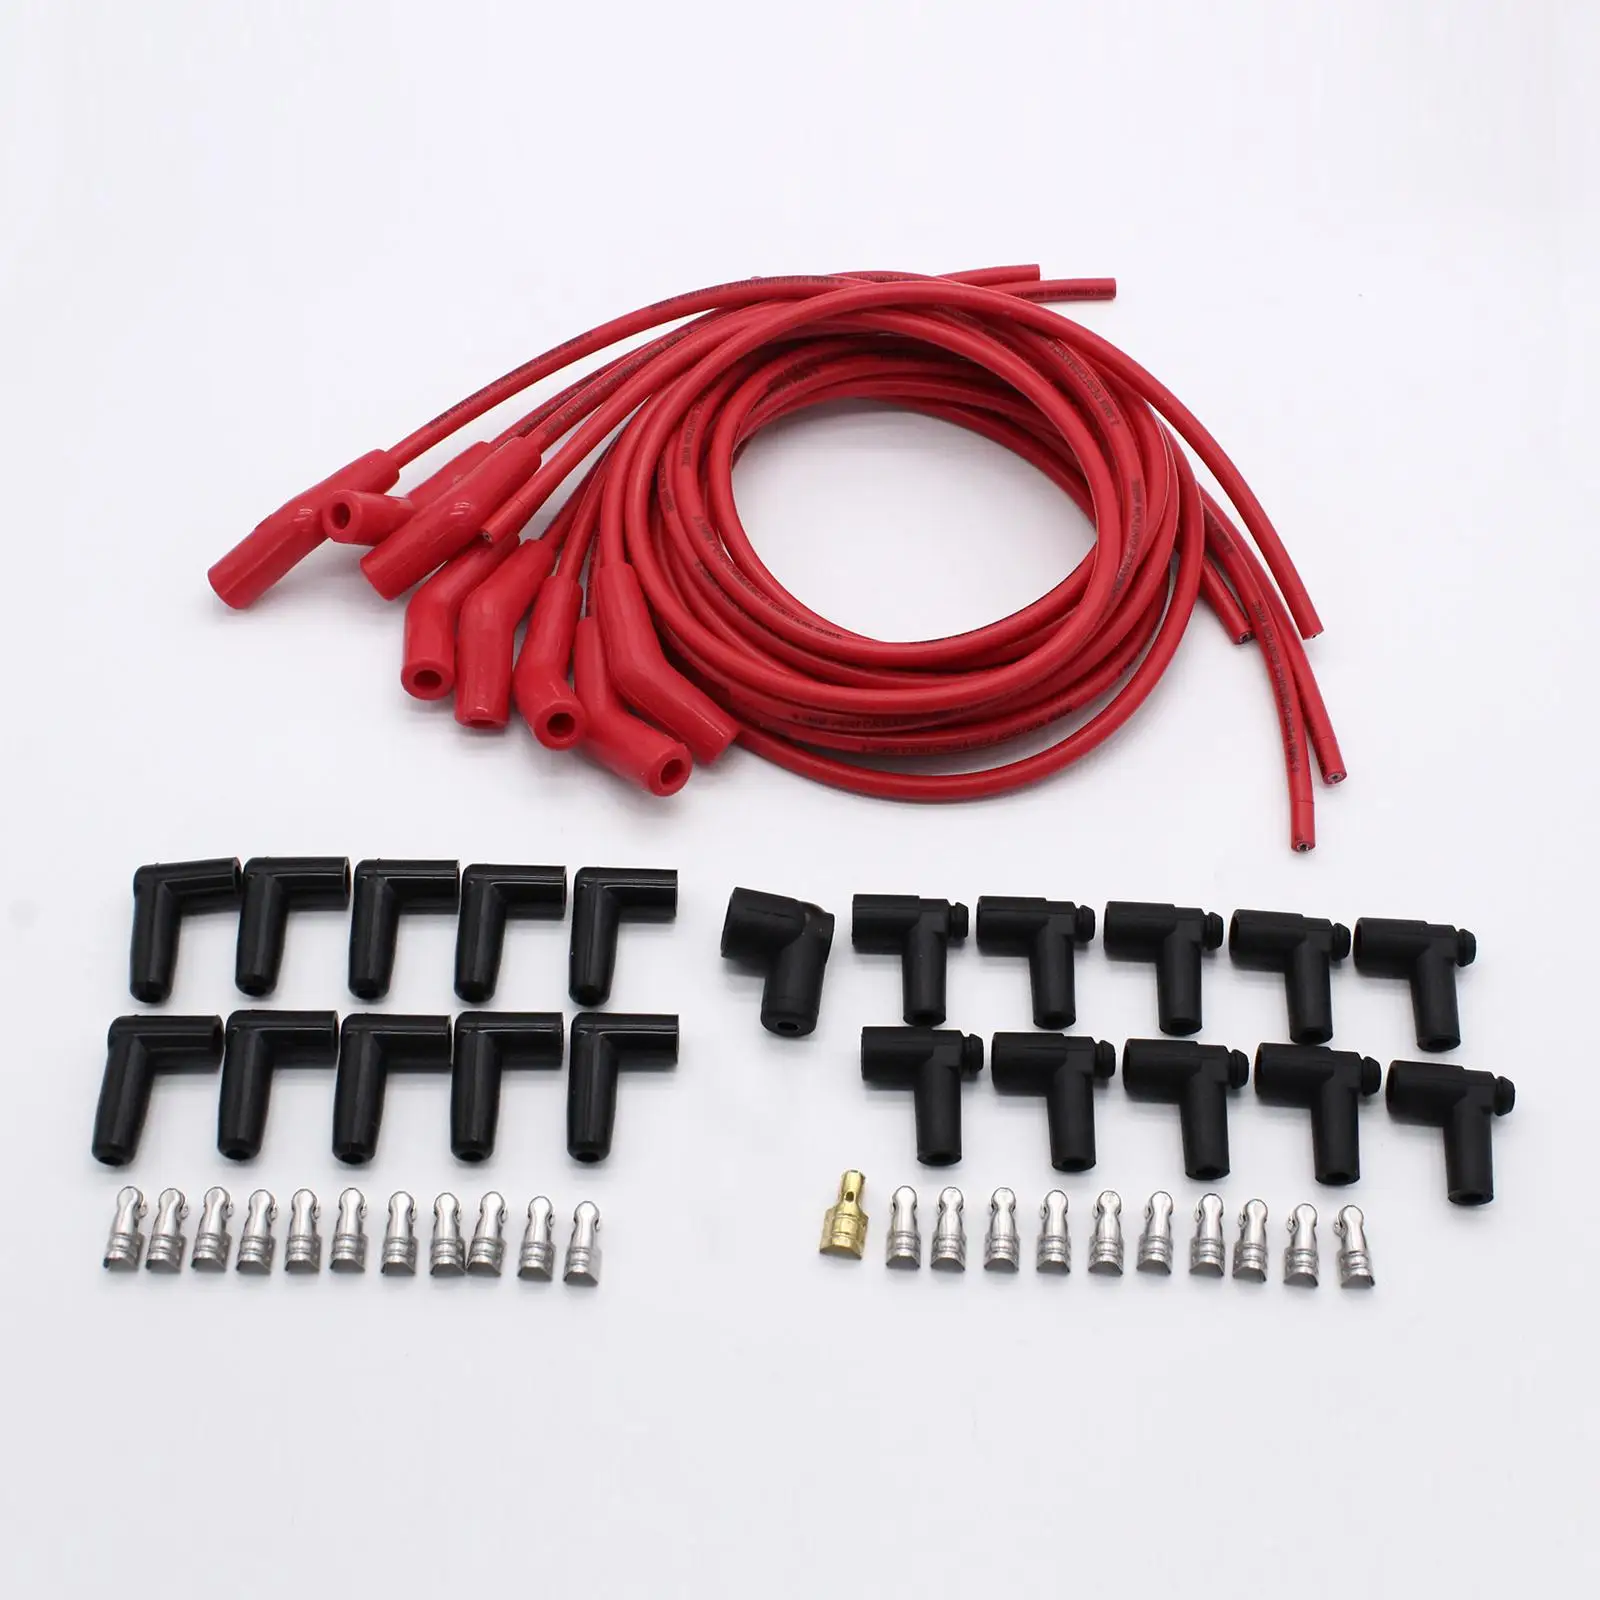 Spark Plug Wire Set Premium Durable Replaces Car Accessories Universal Red with 45/135 Spark Plug Boot for Mopar